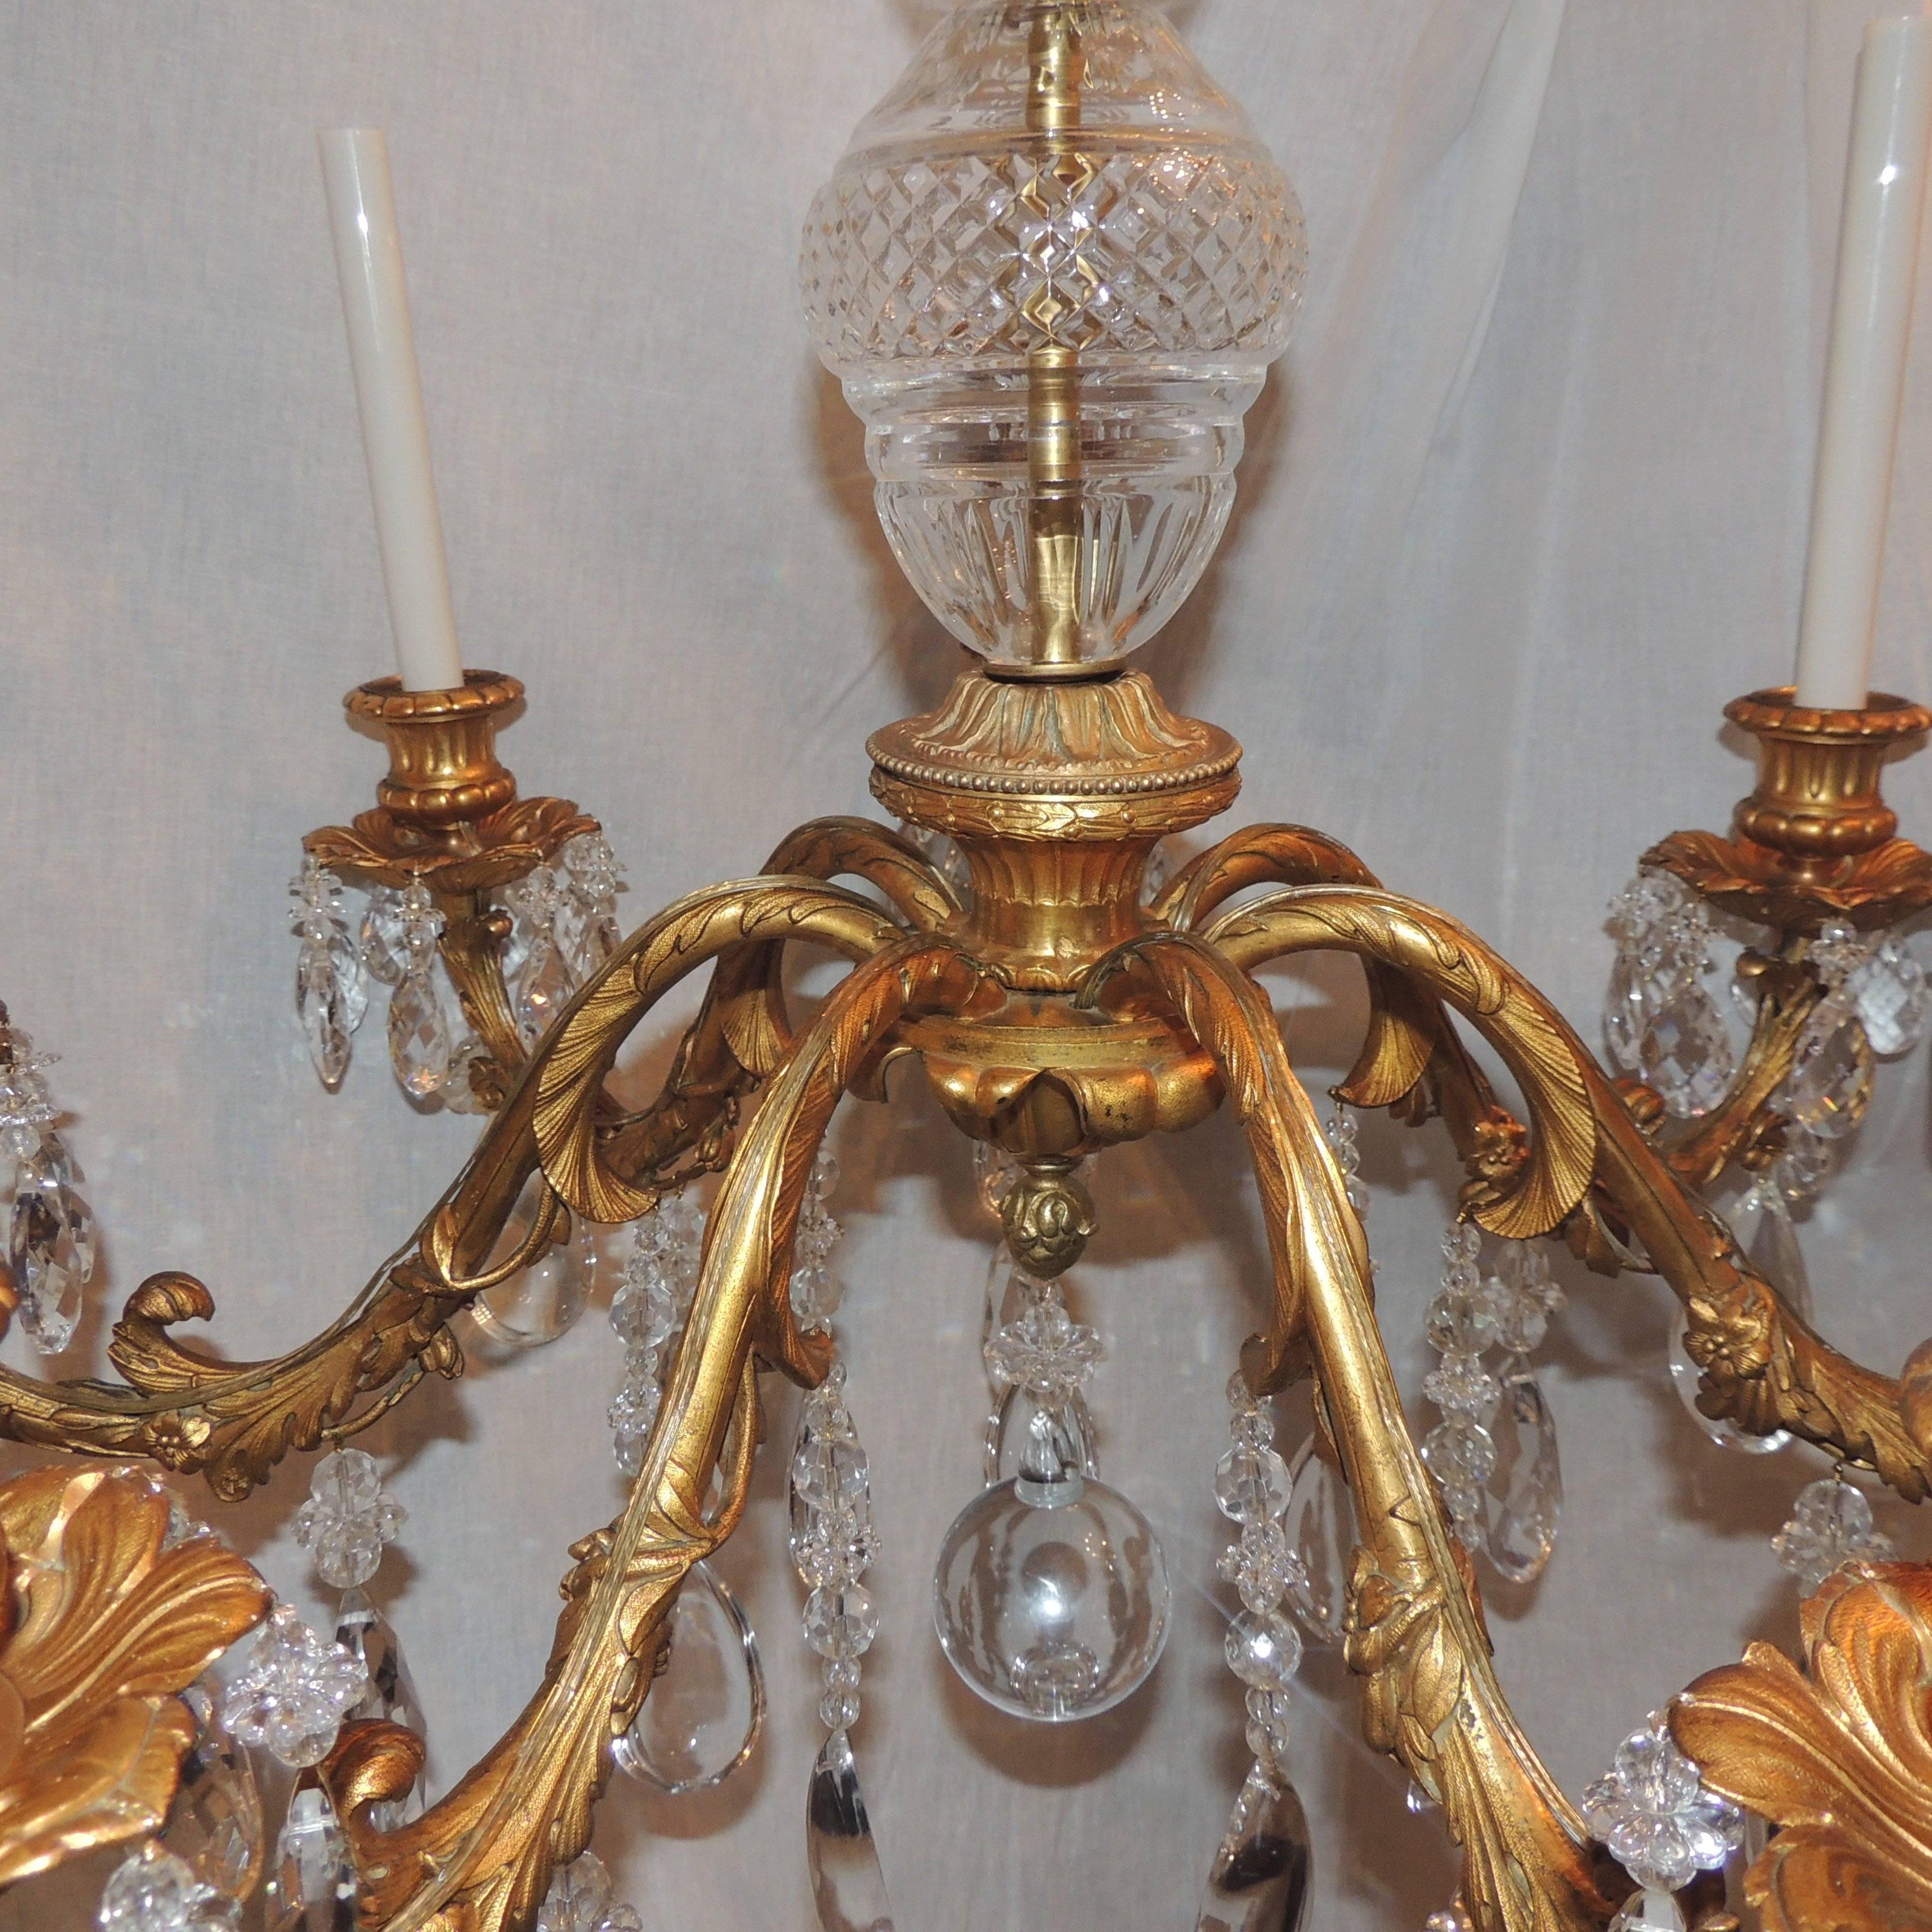 Early 20th Century Wonderful French Gilt Doré Bronze Crystal Fixture Seven-Light Chandelier For Sale